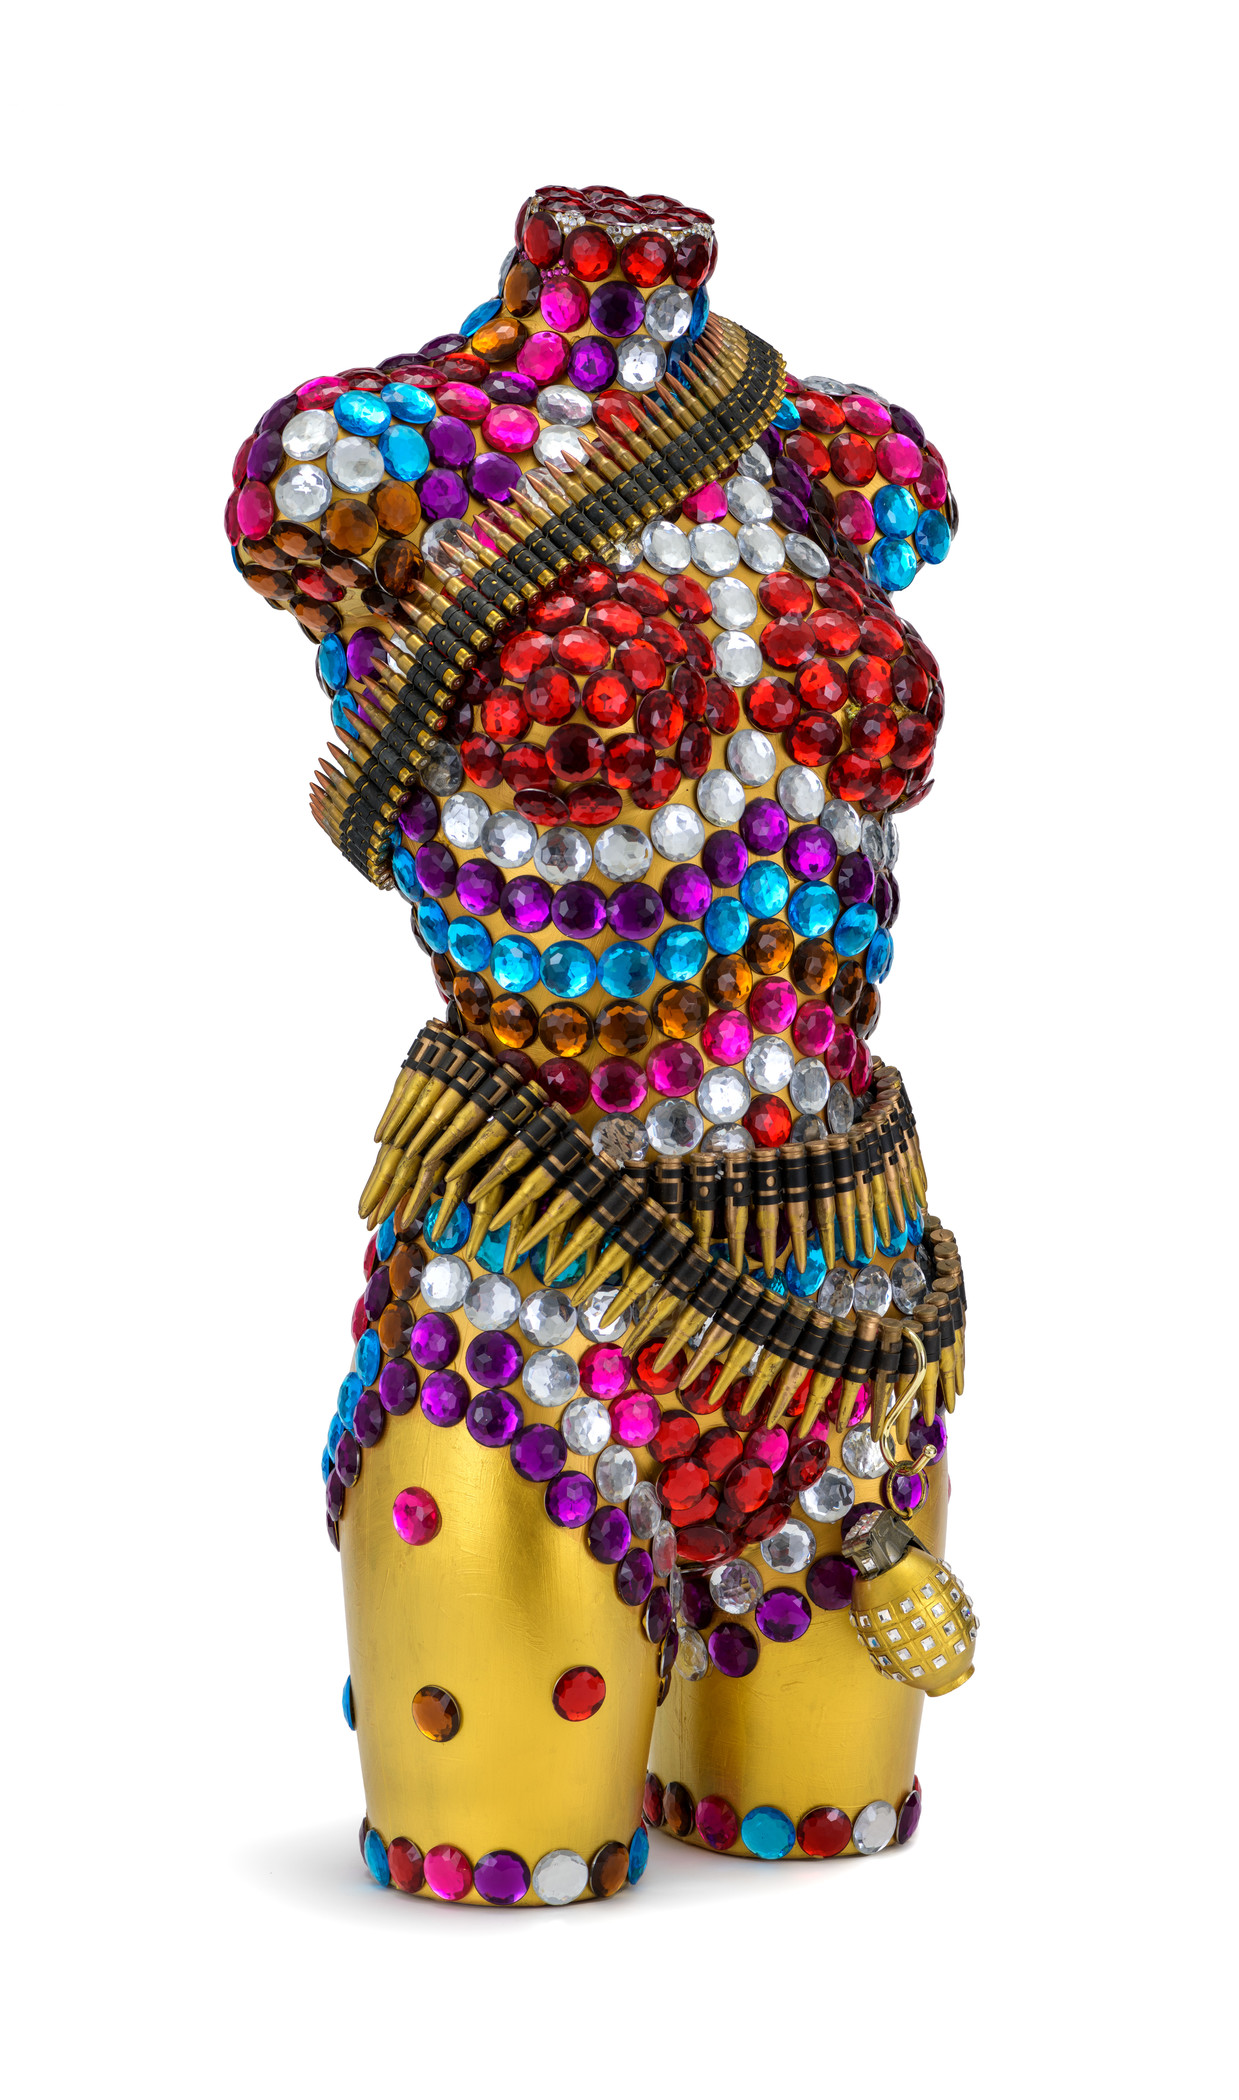 Golden torso sculpture with jewels and weapons